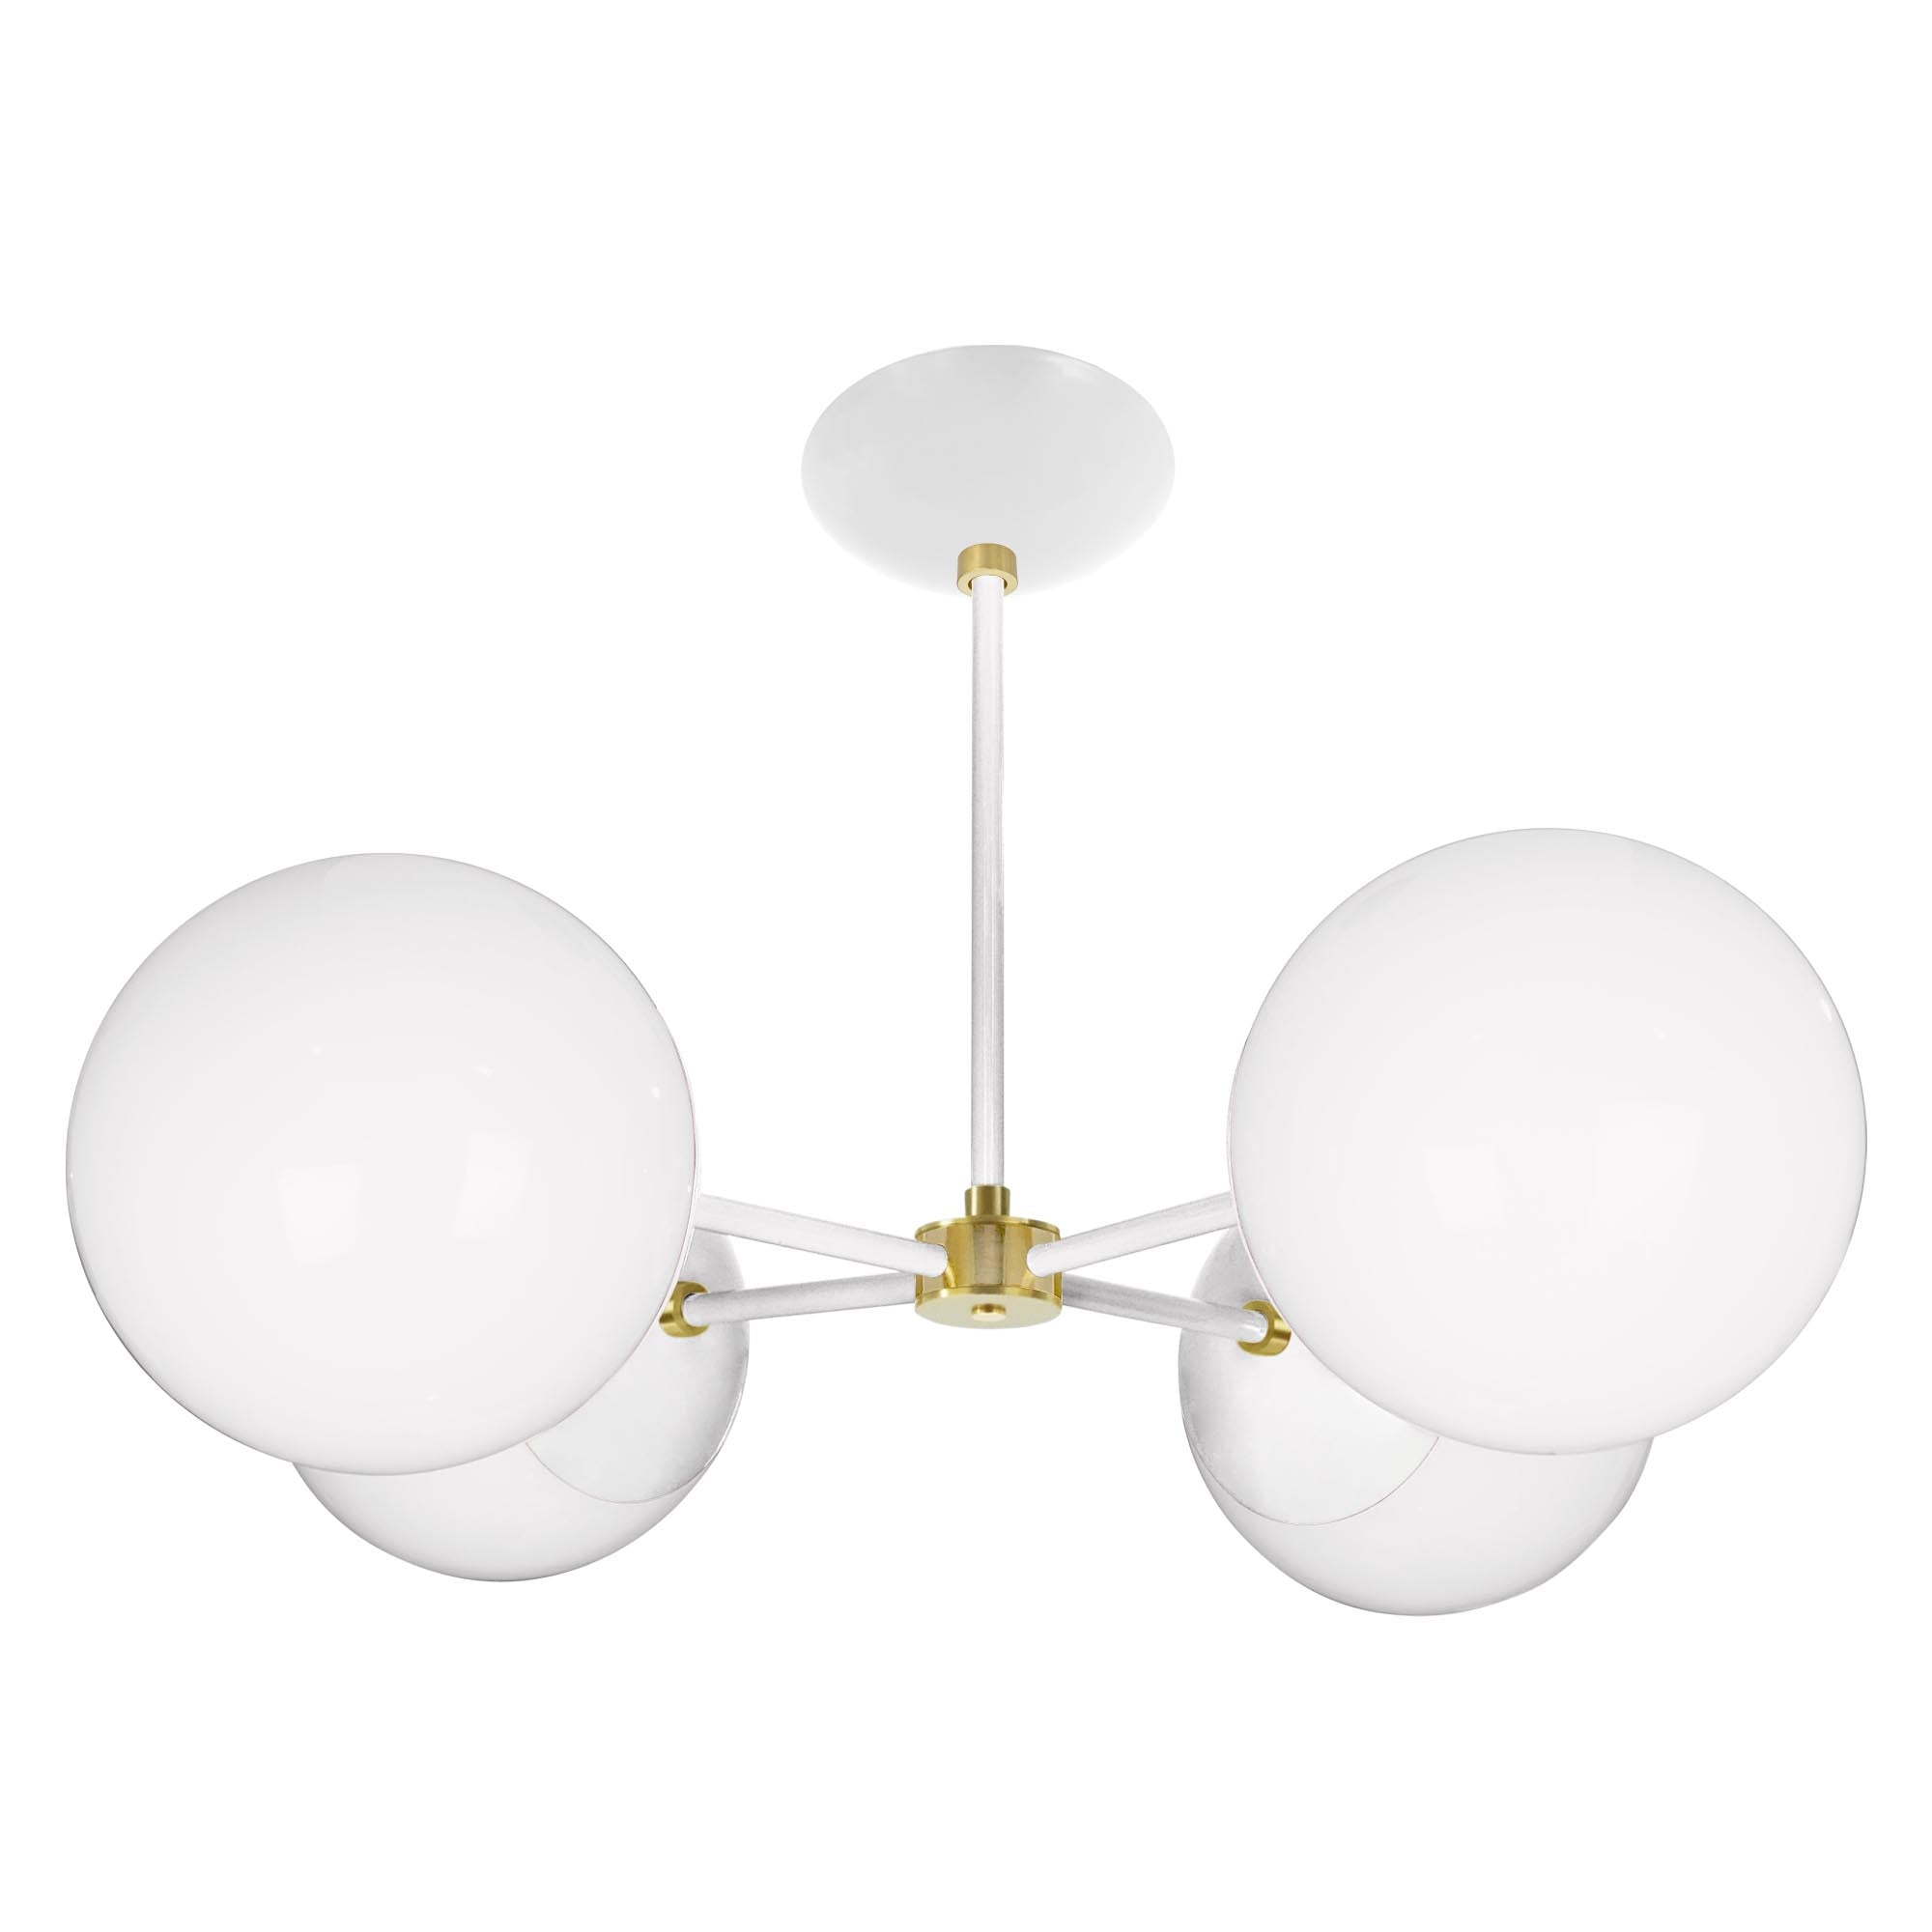 Brass and white color Big Orbi chandelier Dutton Brown lighting